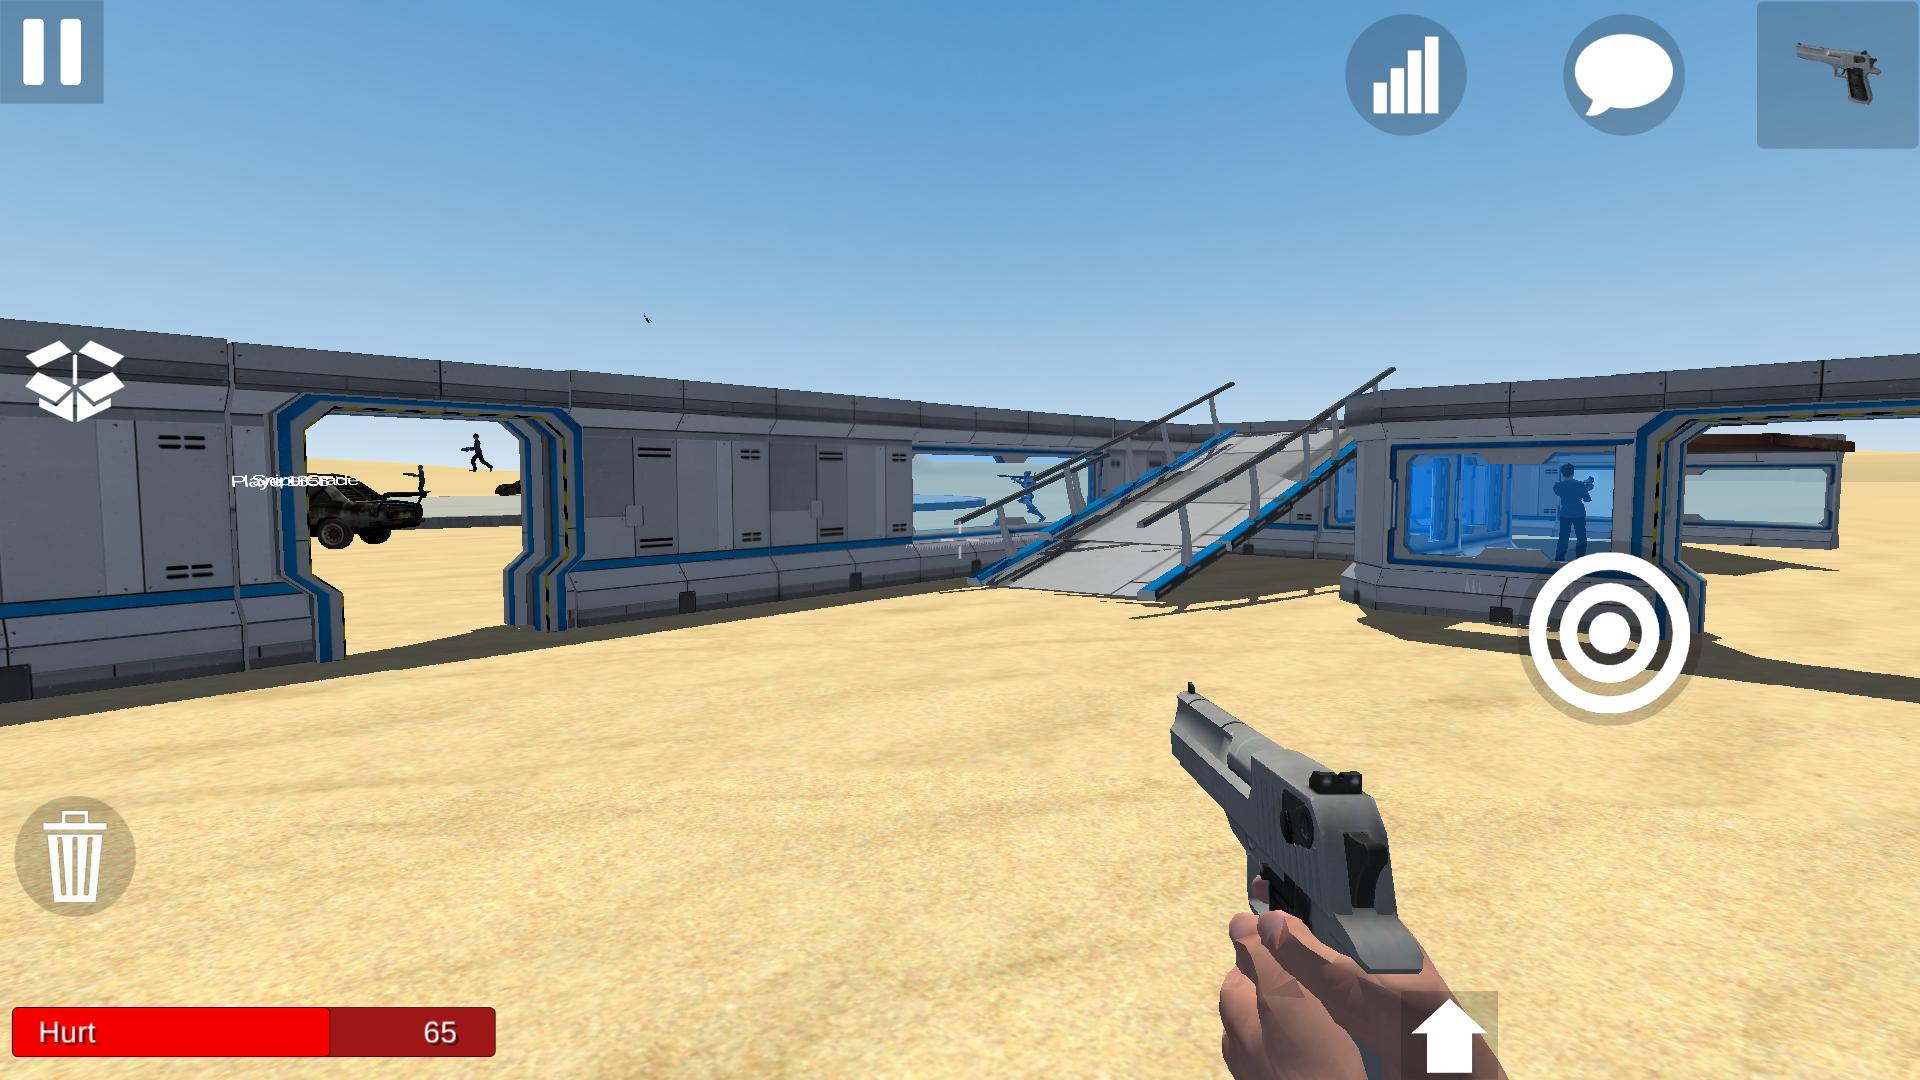 Ultimate Sandbox for Android - APK Download - 